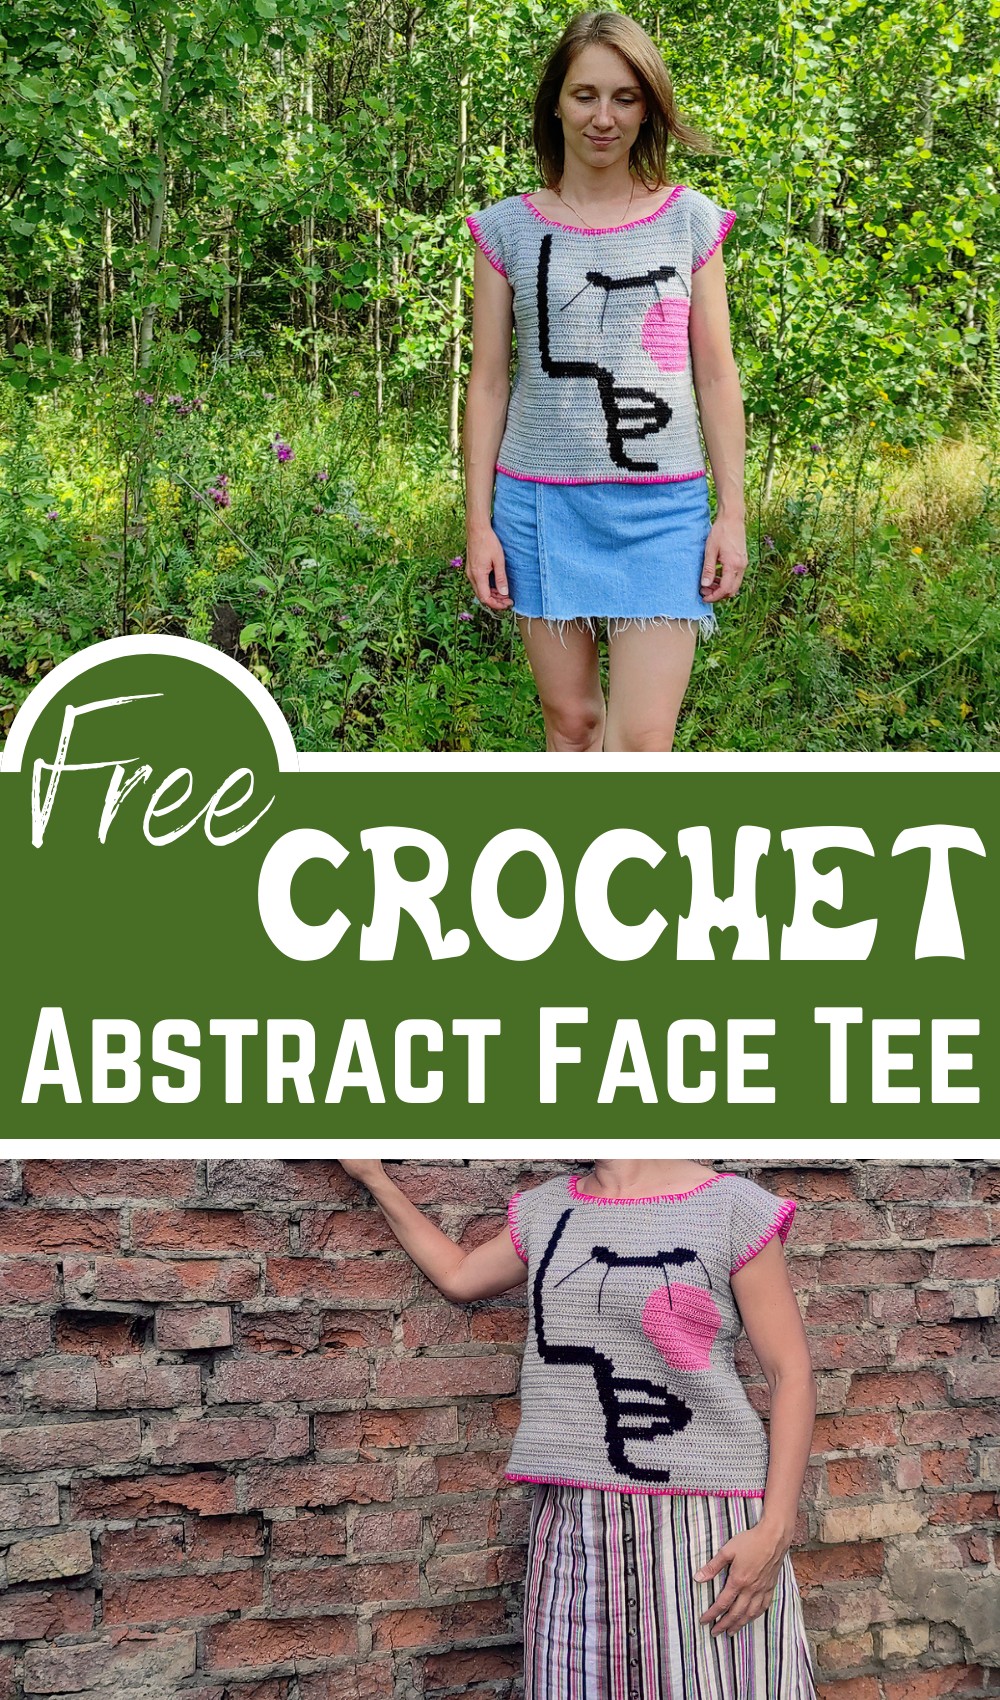 Abstract Face Tee